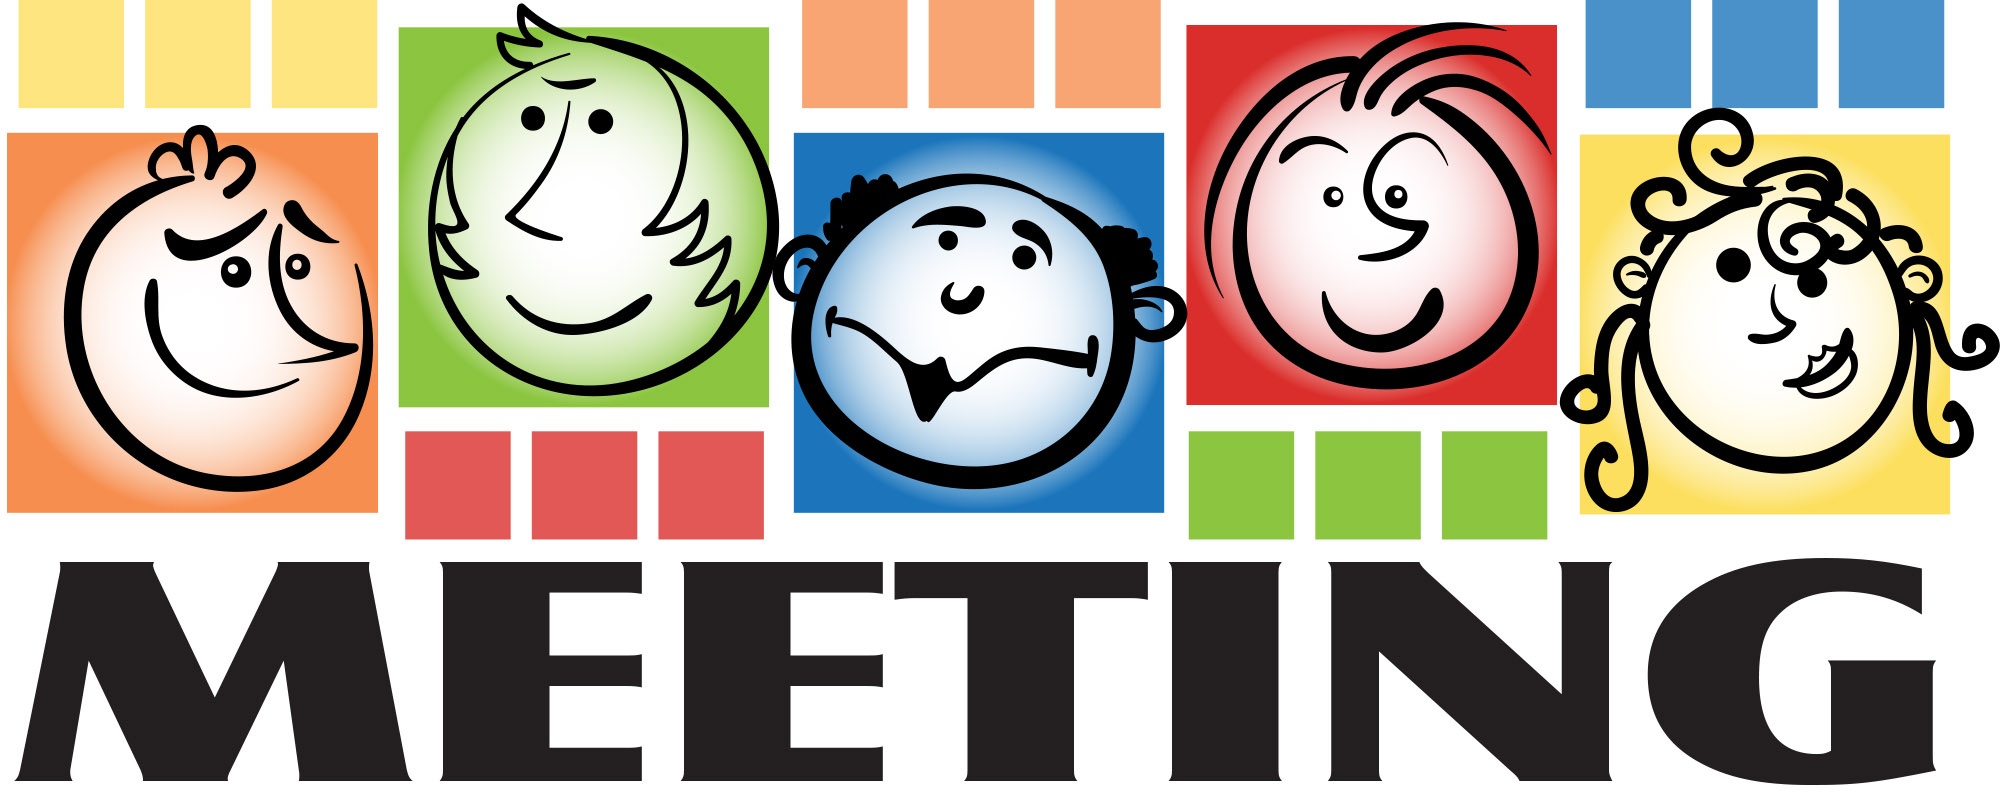 free animated meeting clipart - photo #7